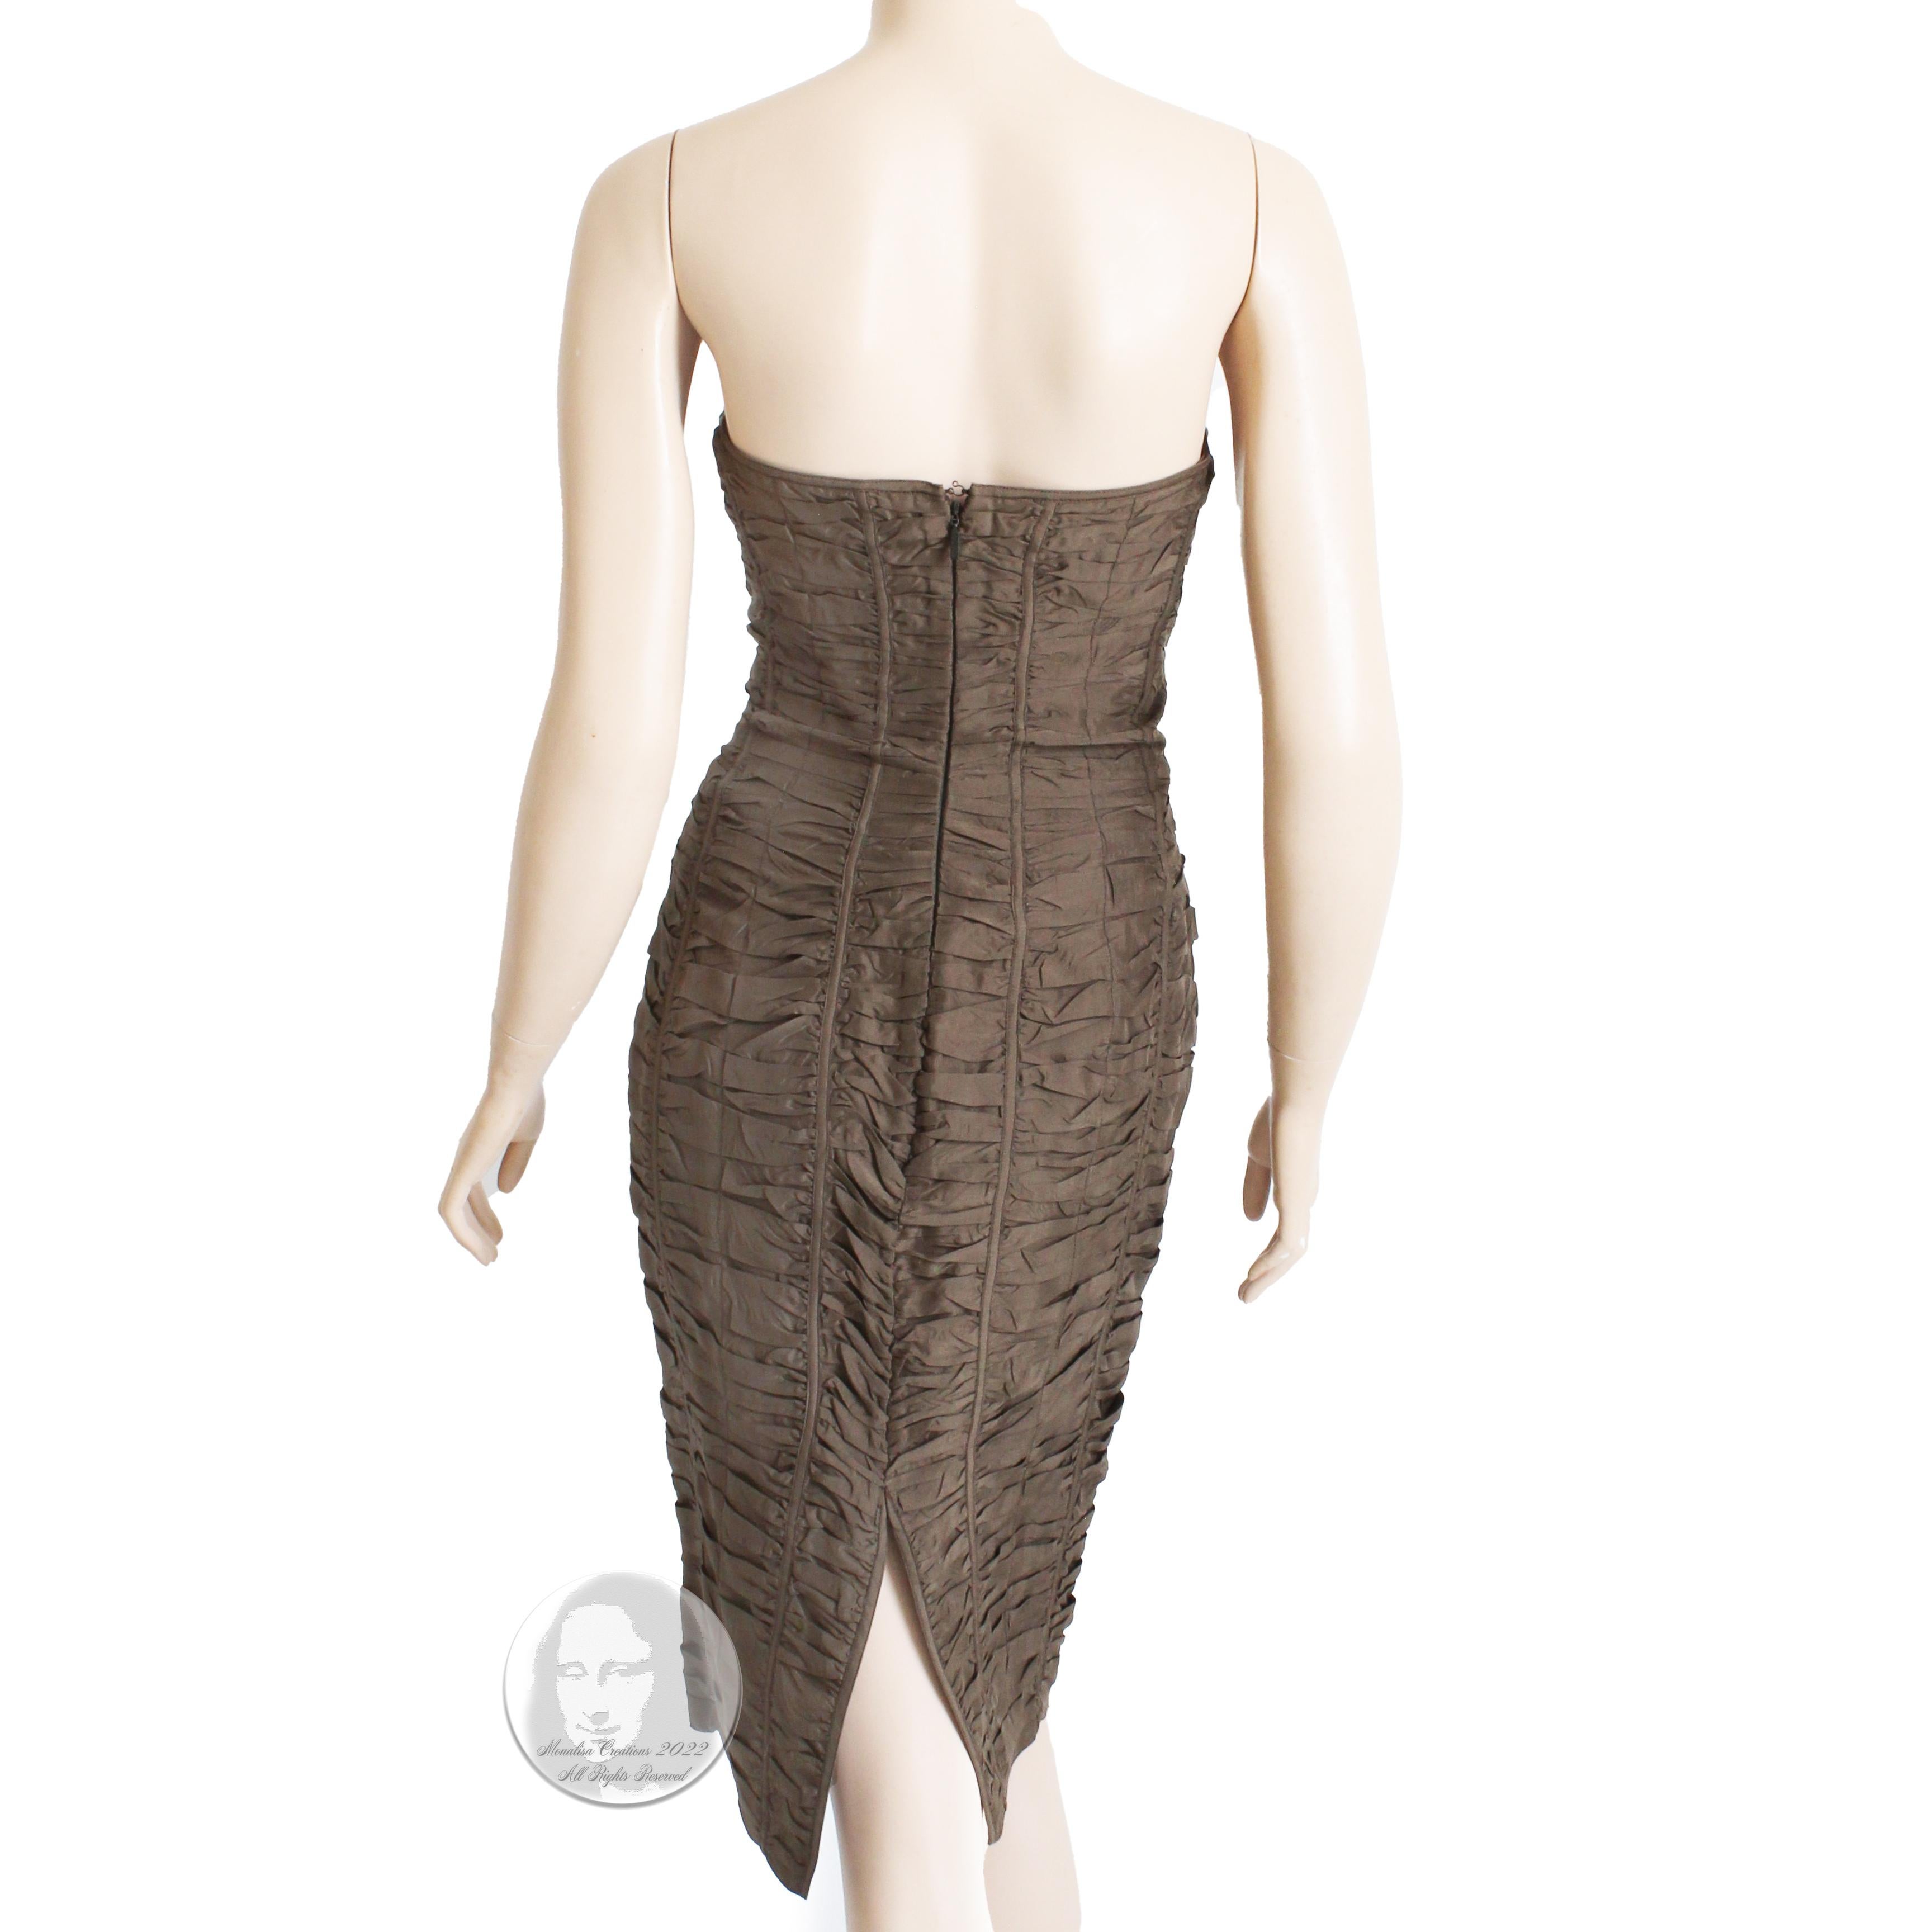 Gucci Dress Corset Bustier Bodice Bodycon Ruched Brown Silk Spring 2001 42 8